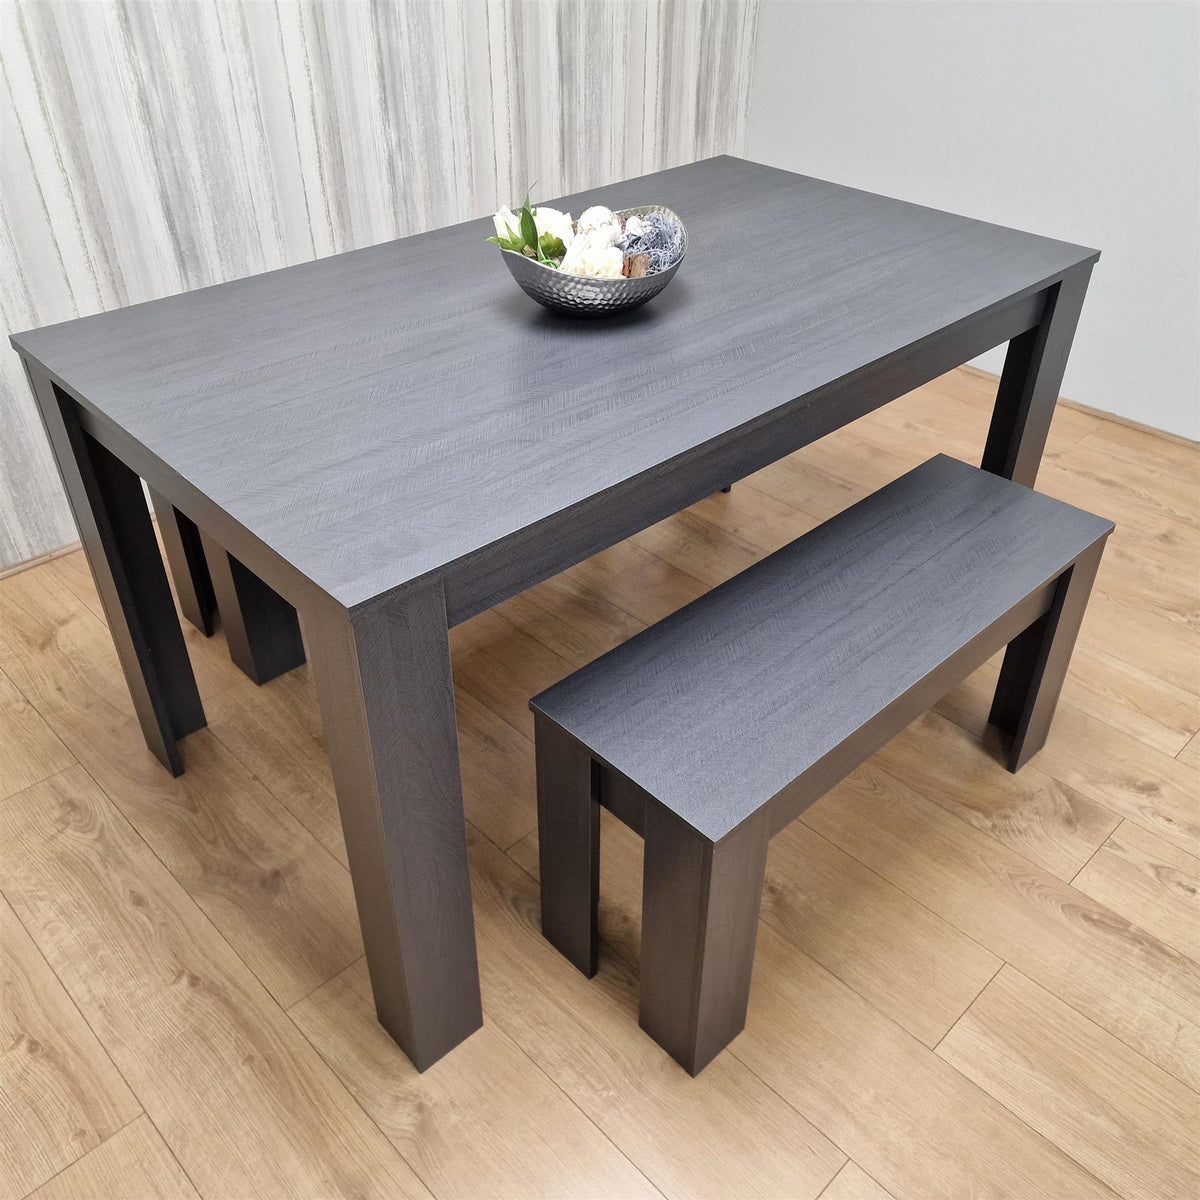 Dining Table Set with 2 Benches Dining Room and Kitchen table set of 2